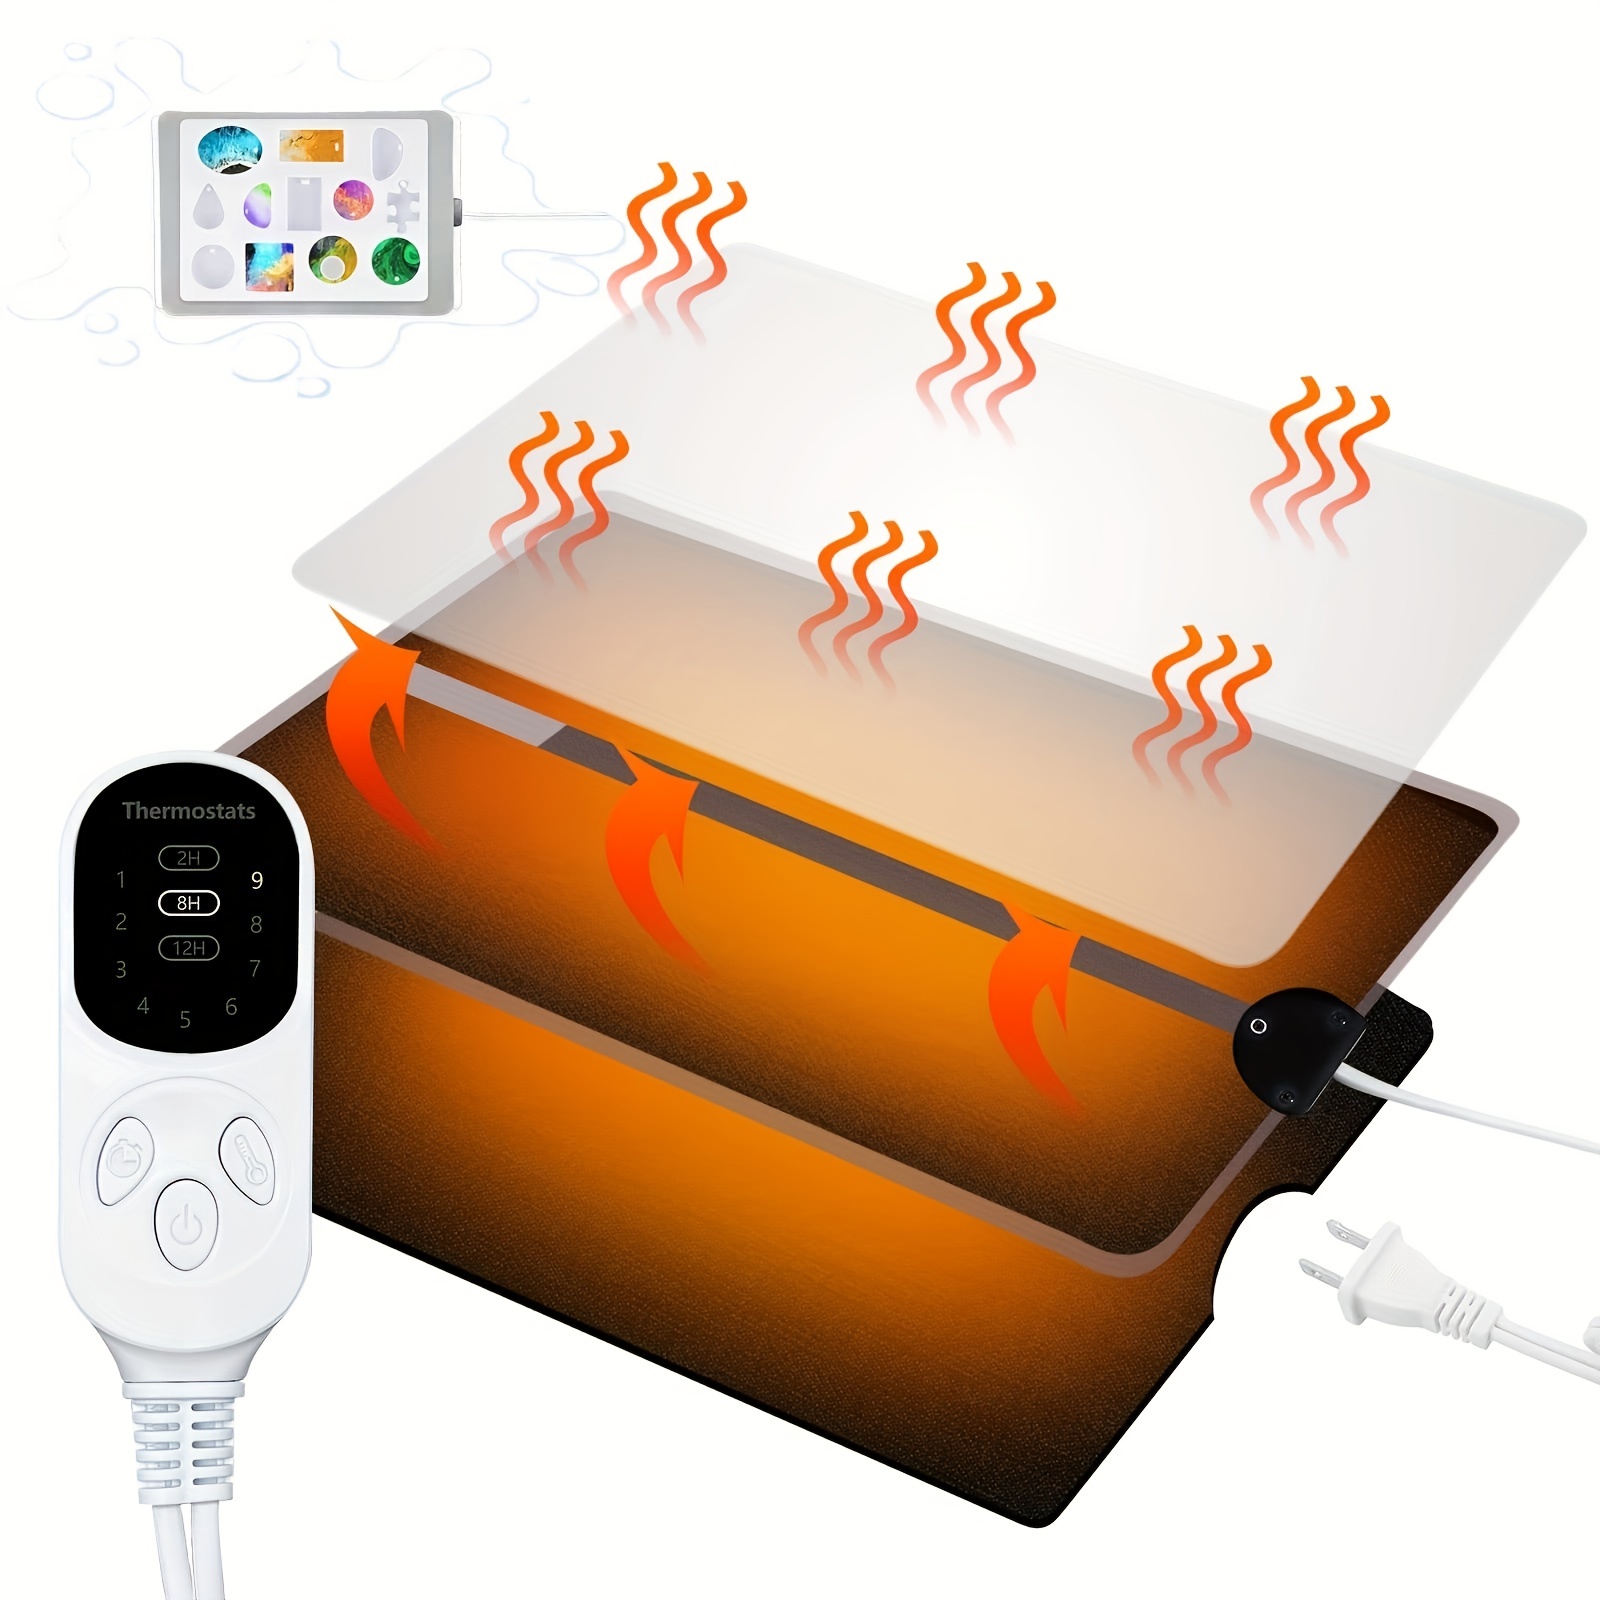 Faster Curing Resin Heating Mat - Lightweight Quick Dryer - Epoxy